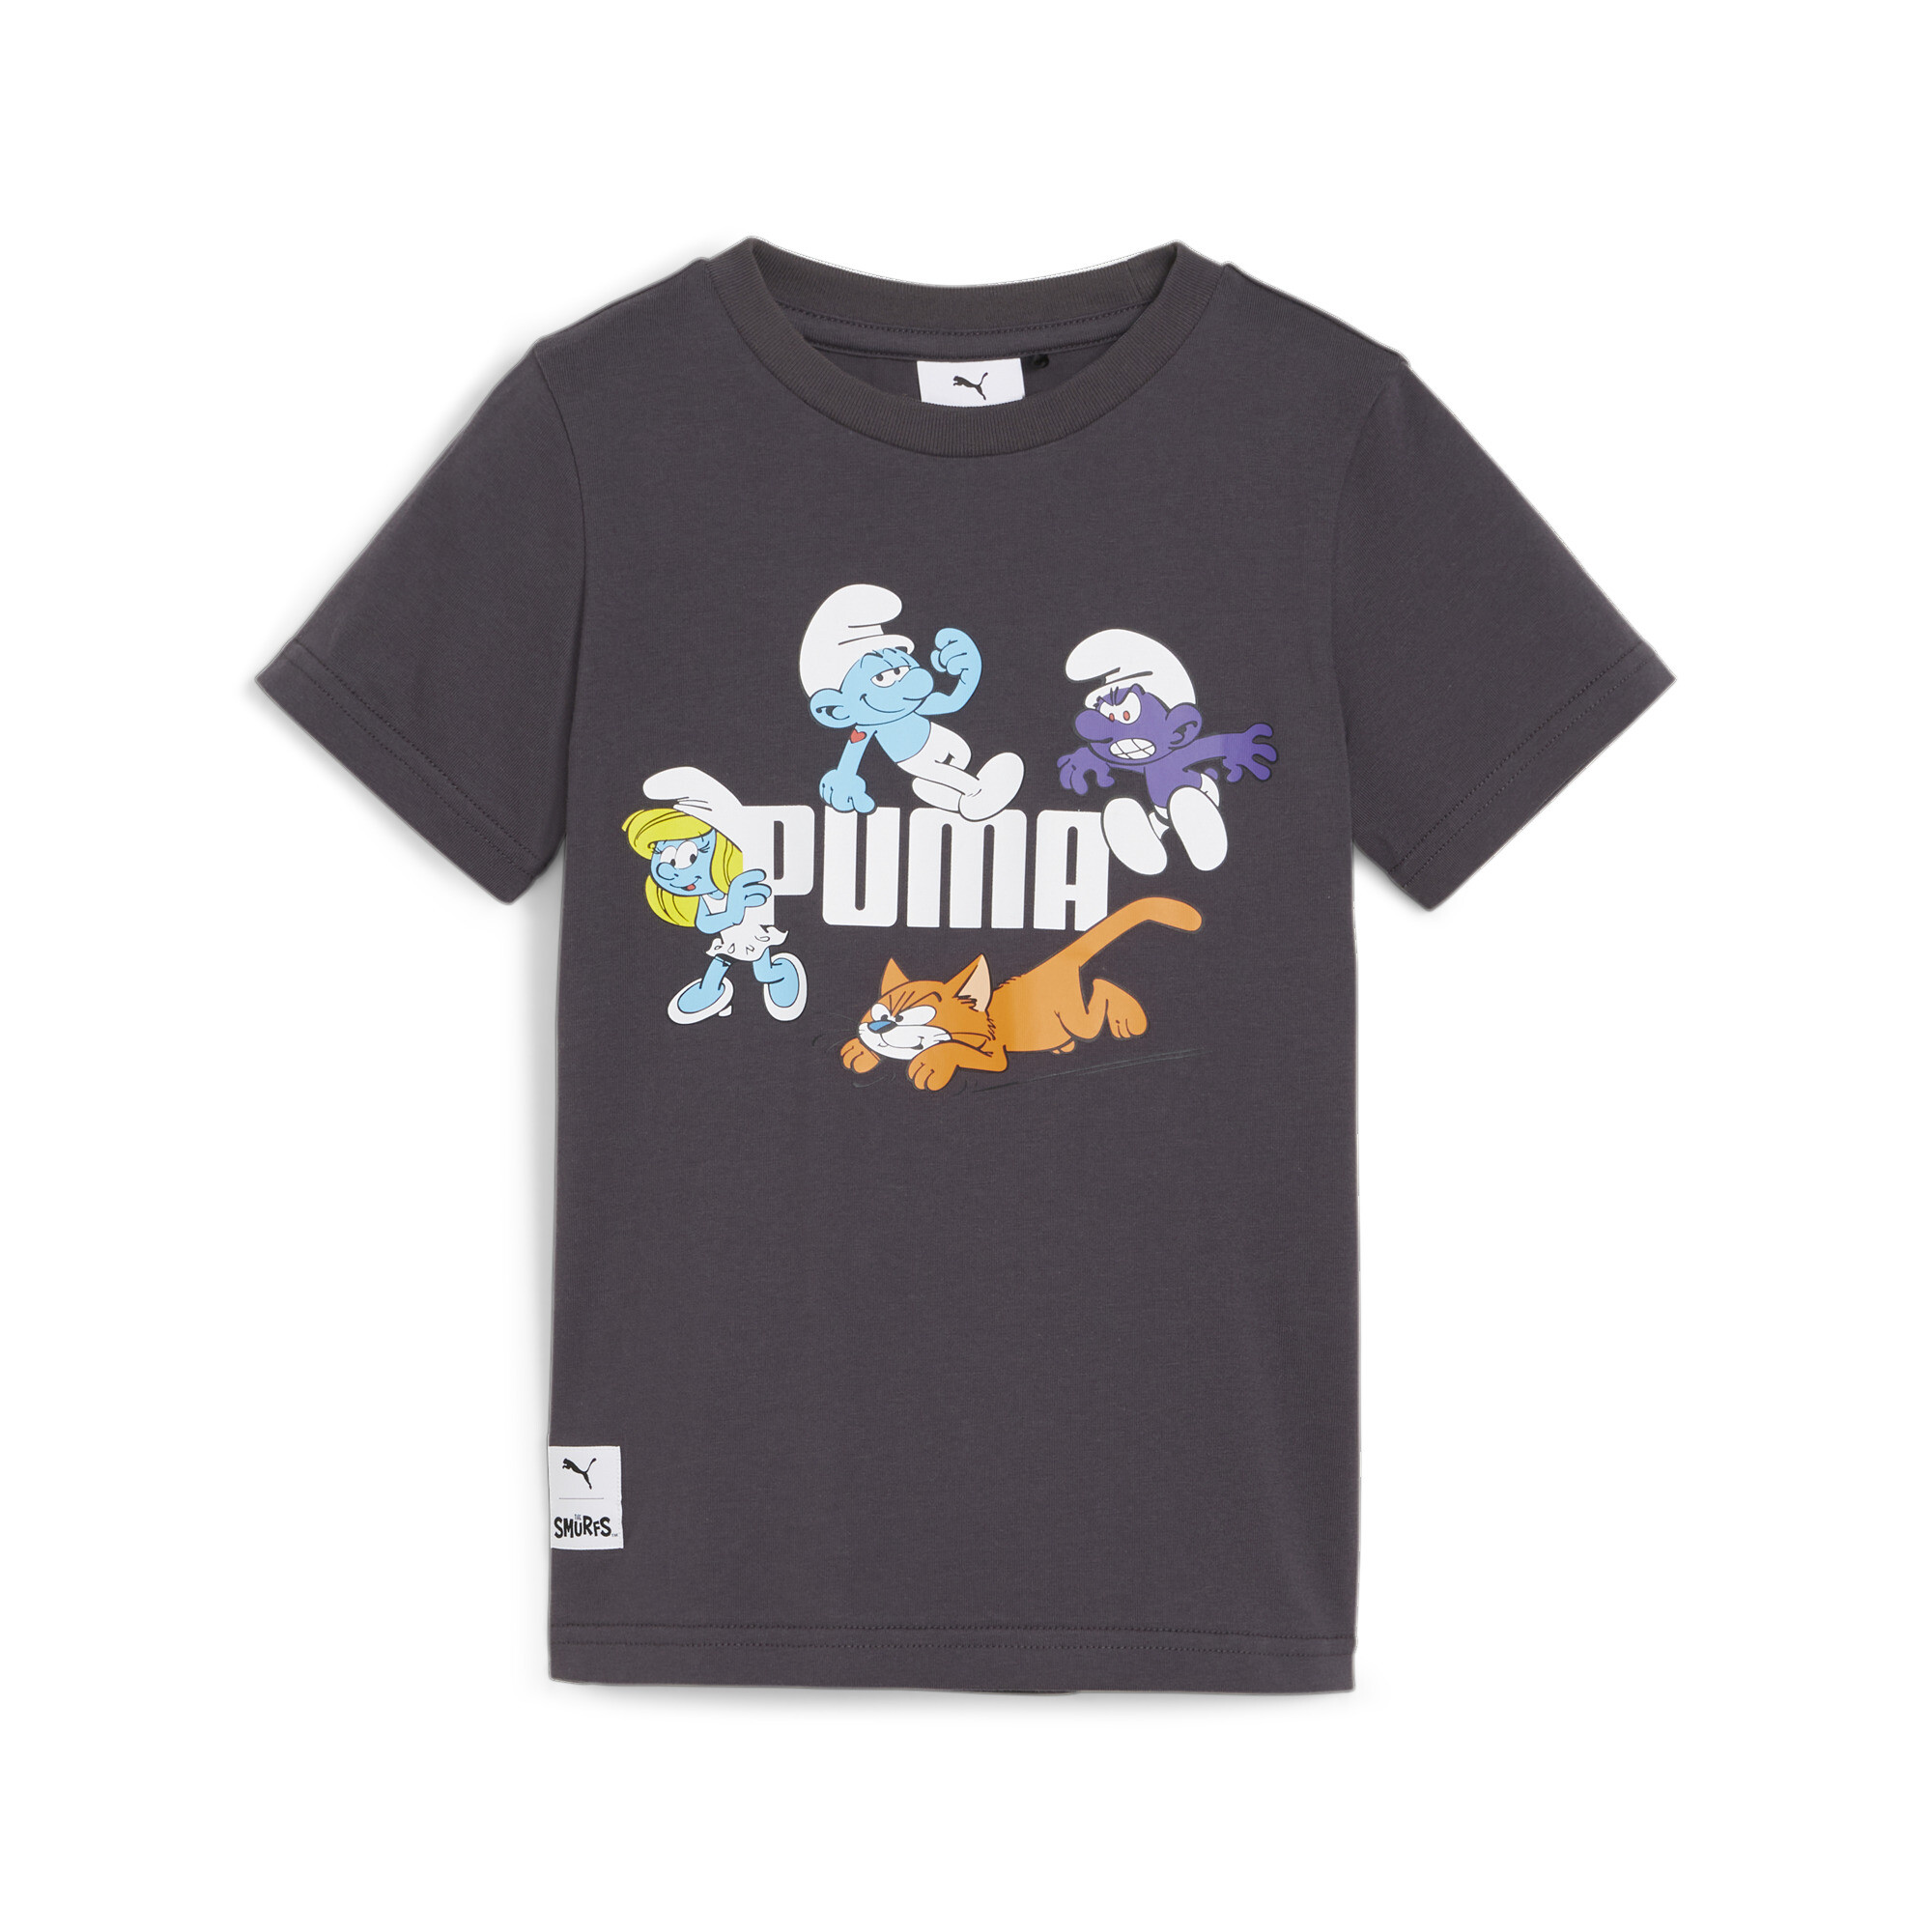 PUMA X THE SMURFS T-Shirt In Gray, Size 11-12 Youth